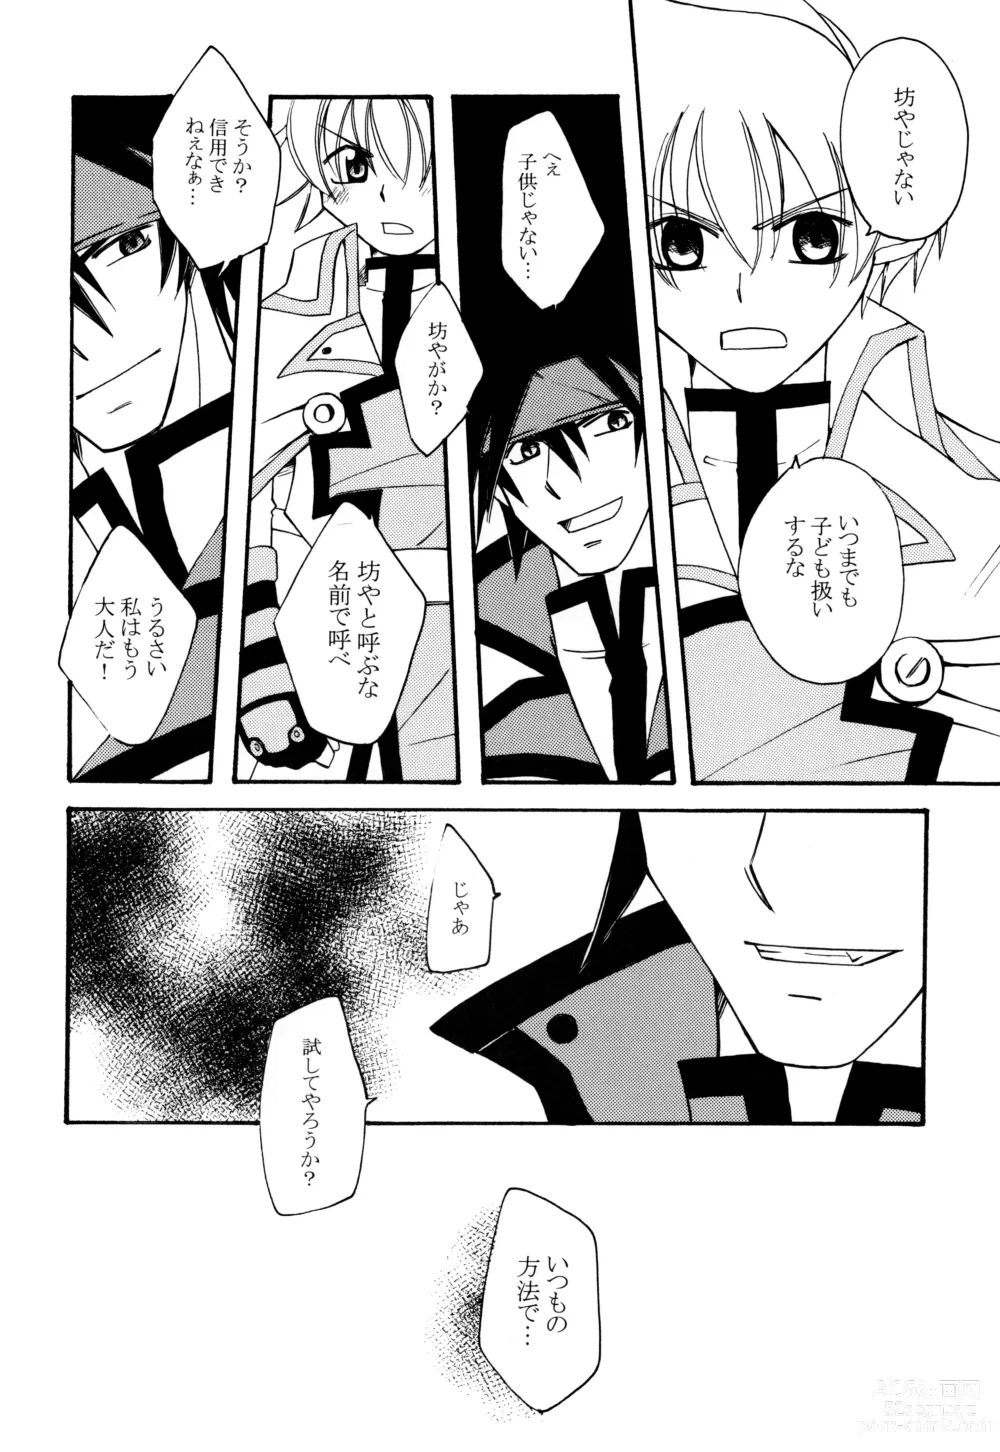 Page 7 of doujinshi Melting point